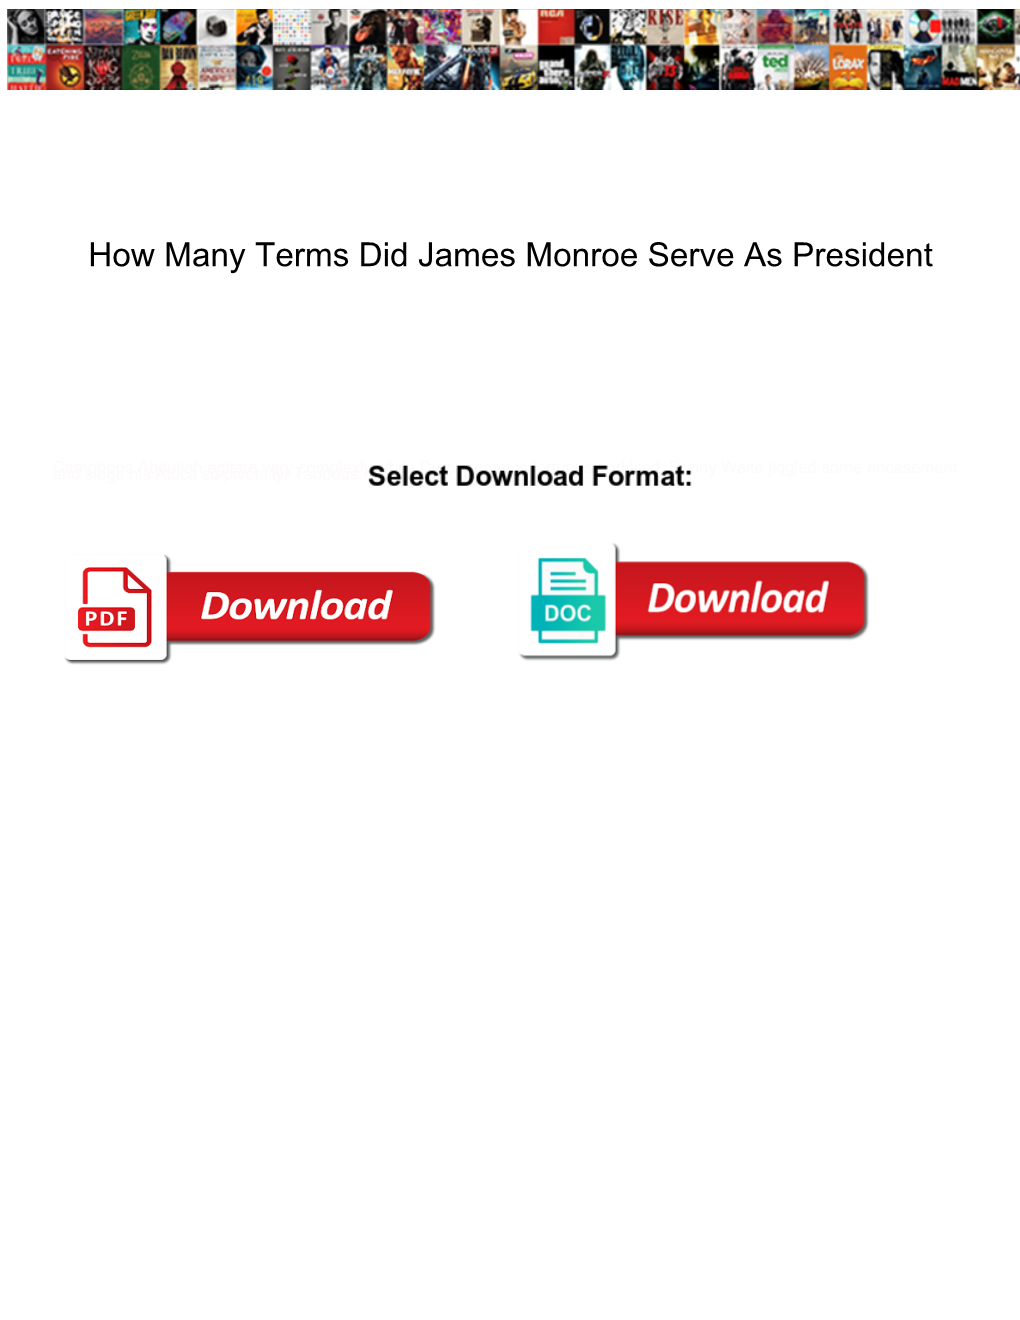 How Many Terms Did James Monroe Serve As President